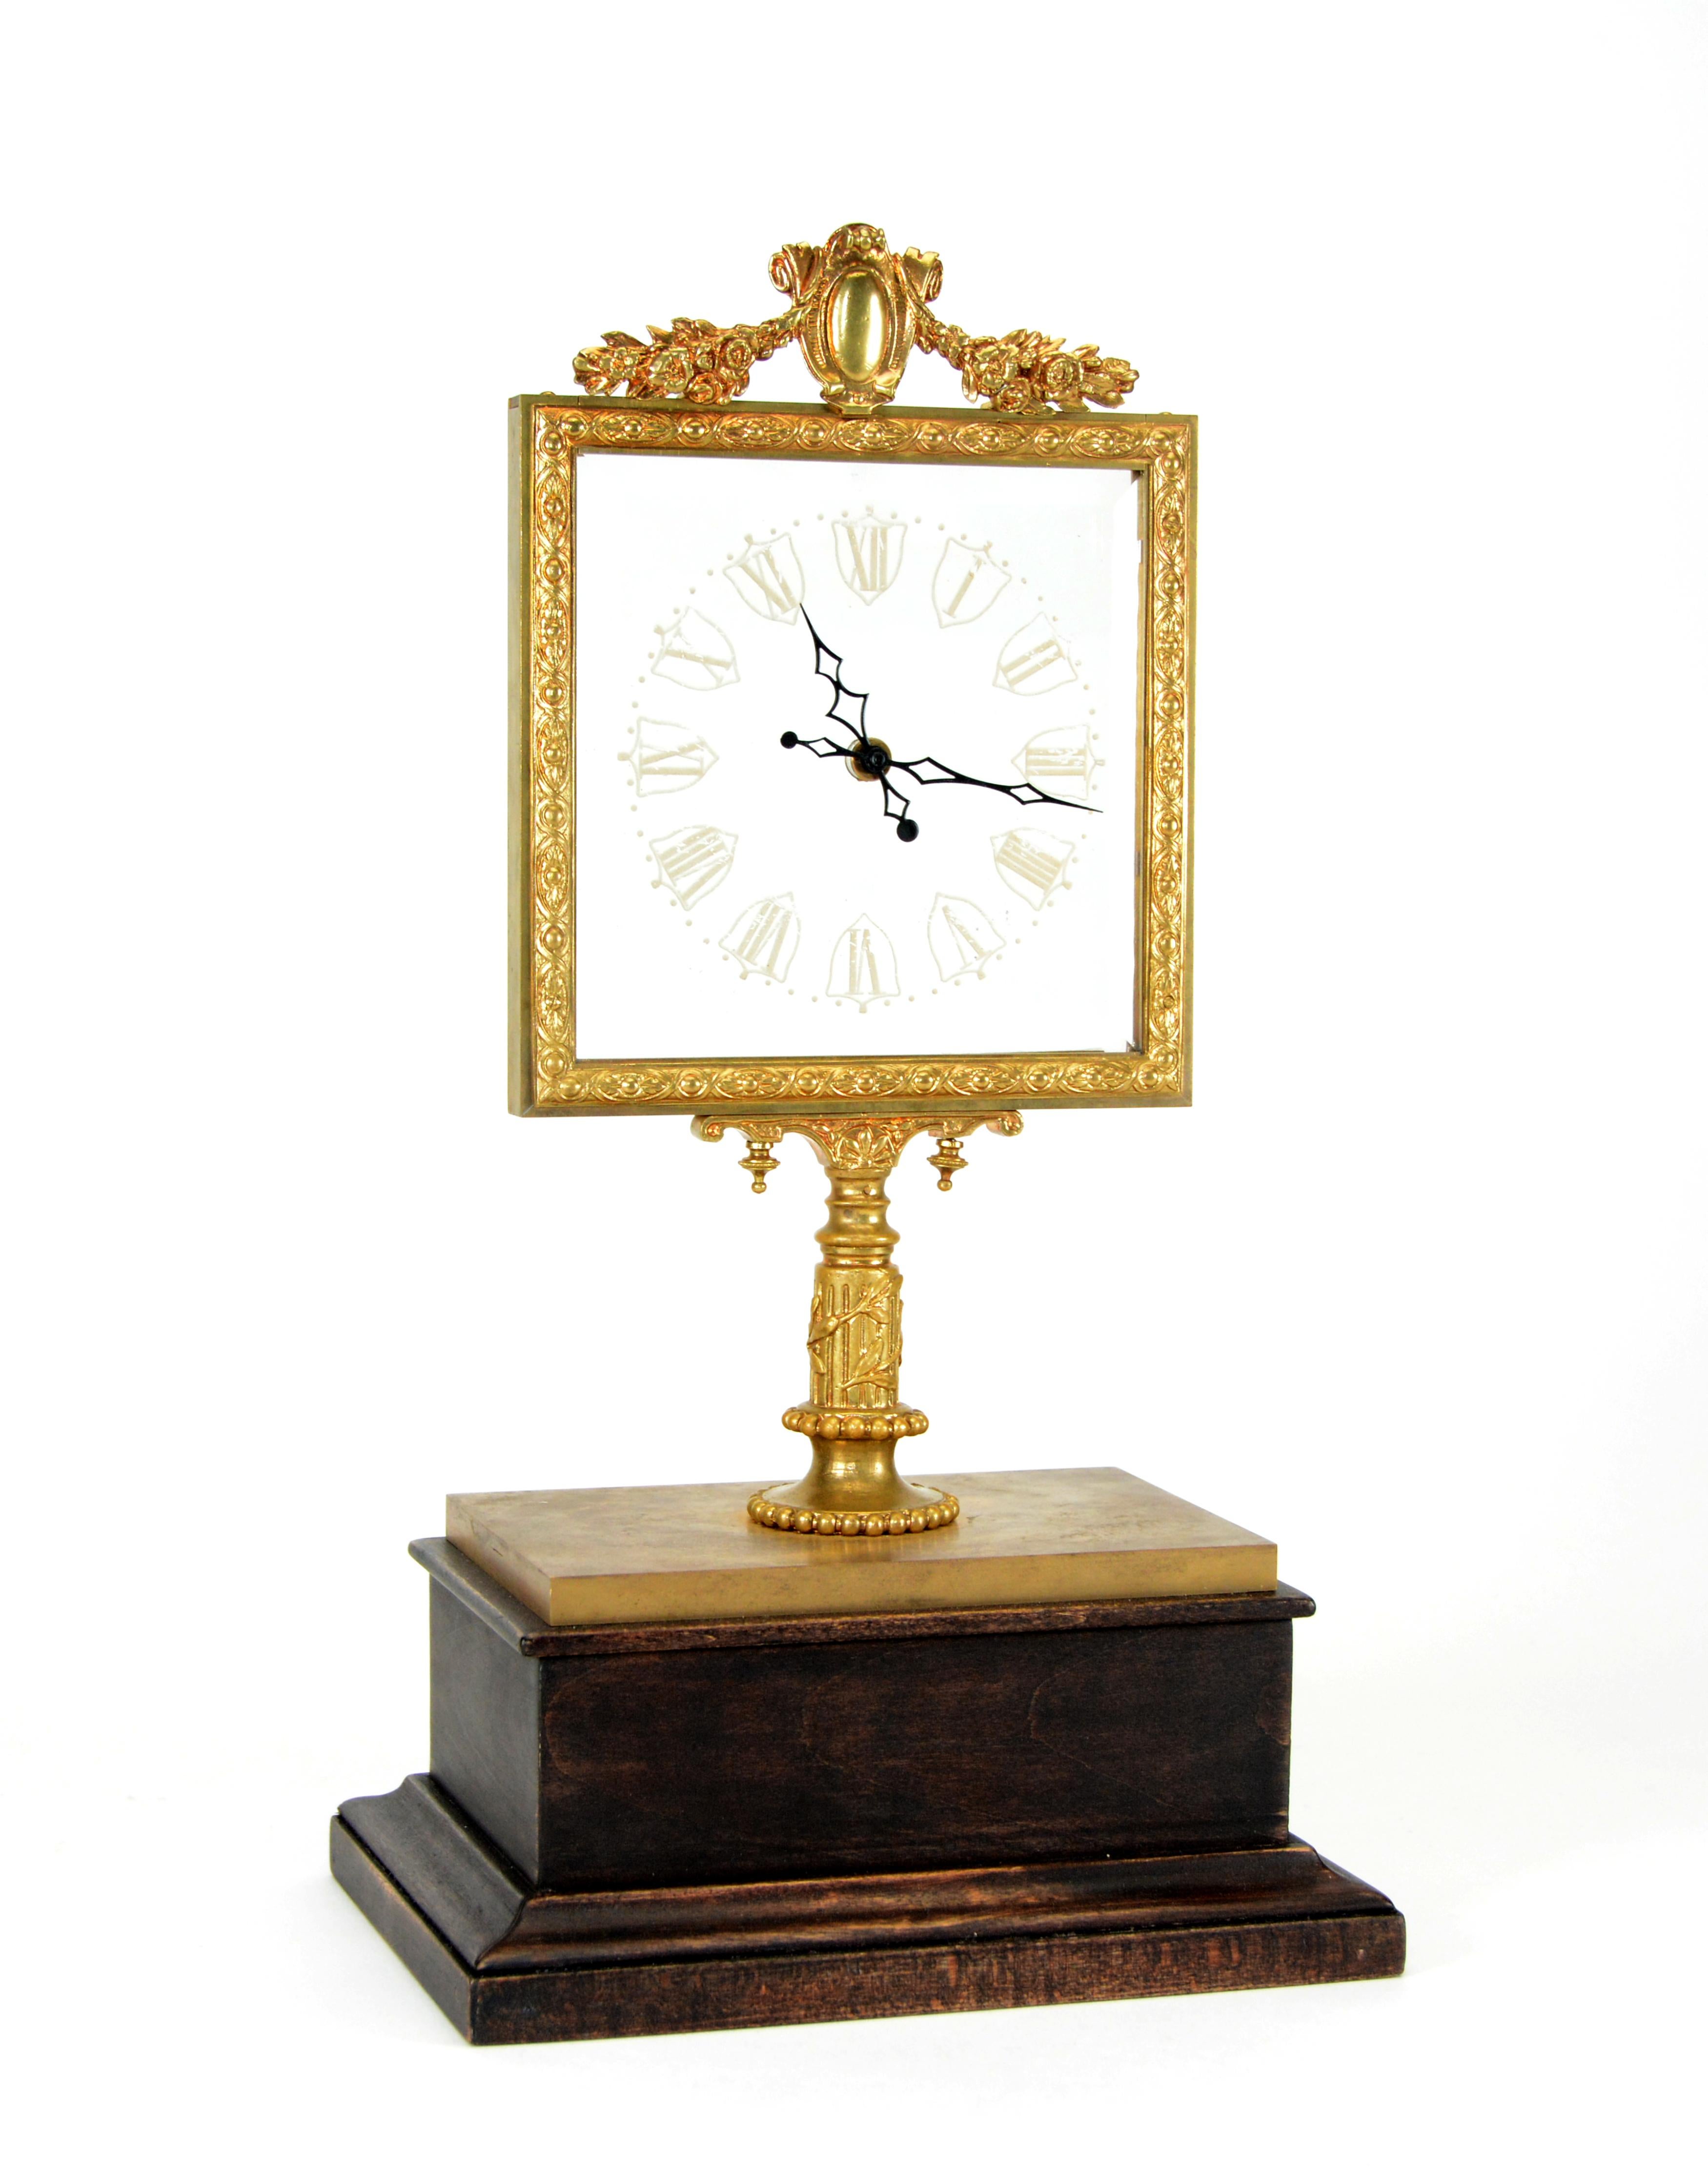 A rare mystery clock, attributed to famous French magician and mechanic, Jean Robert-Houdin. This total mechanical clock has a very noticeable large square glass dial, with 2 hands pointing to the time with Roman numerals. The glass dial is